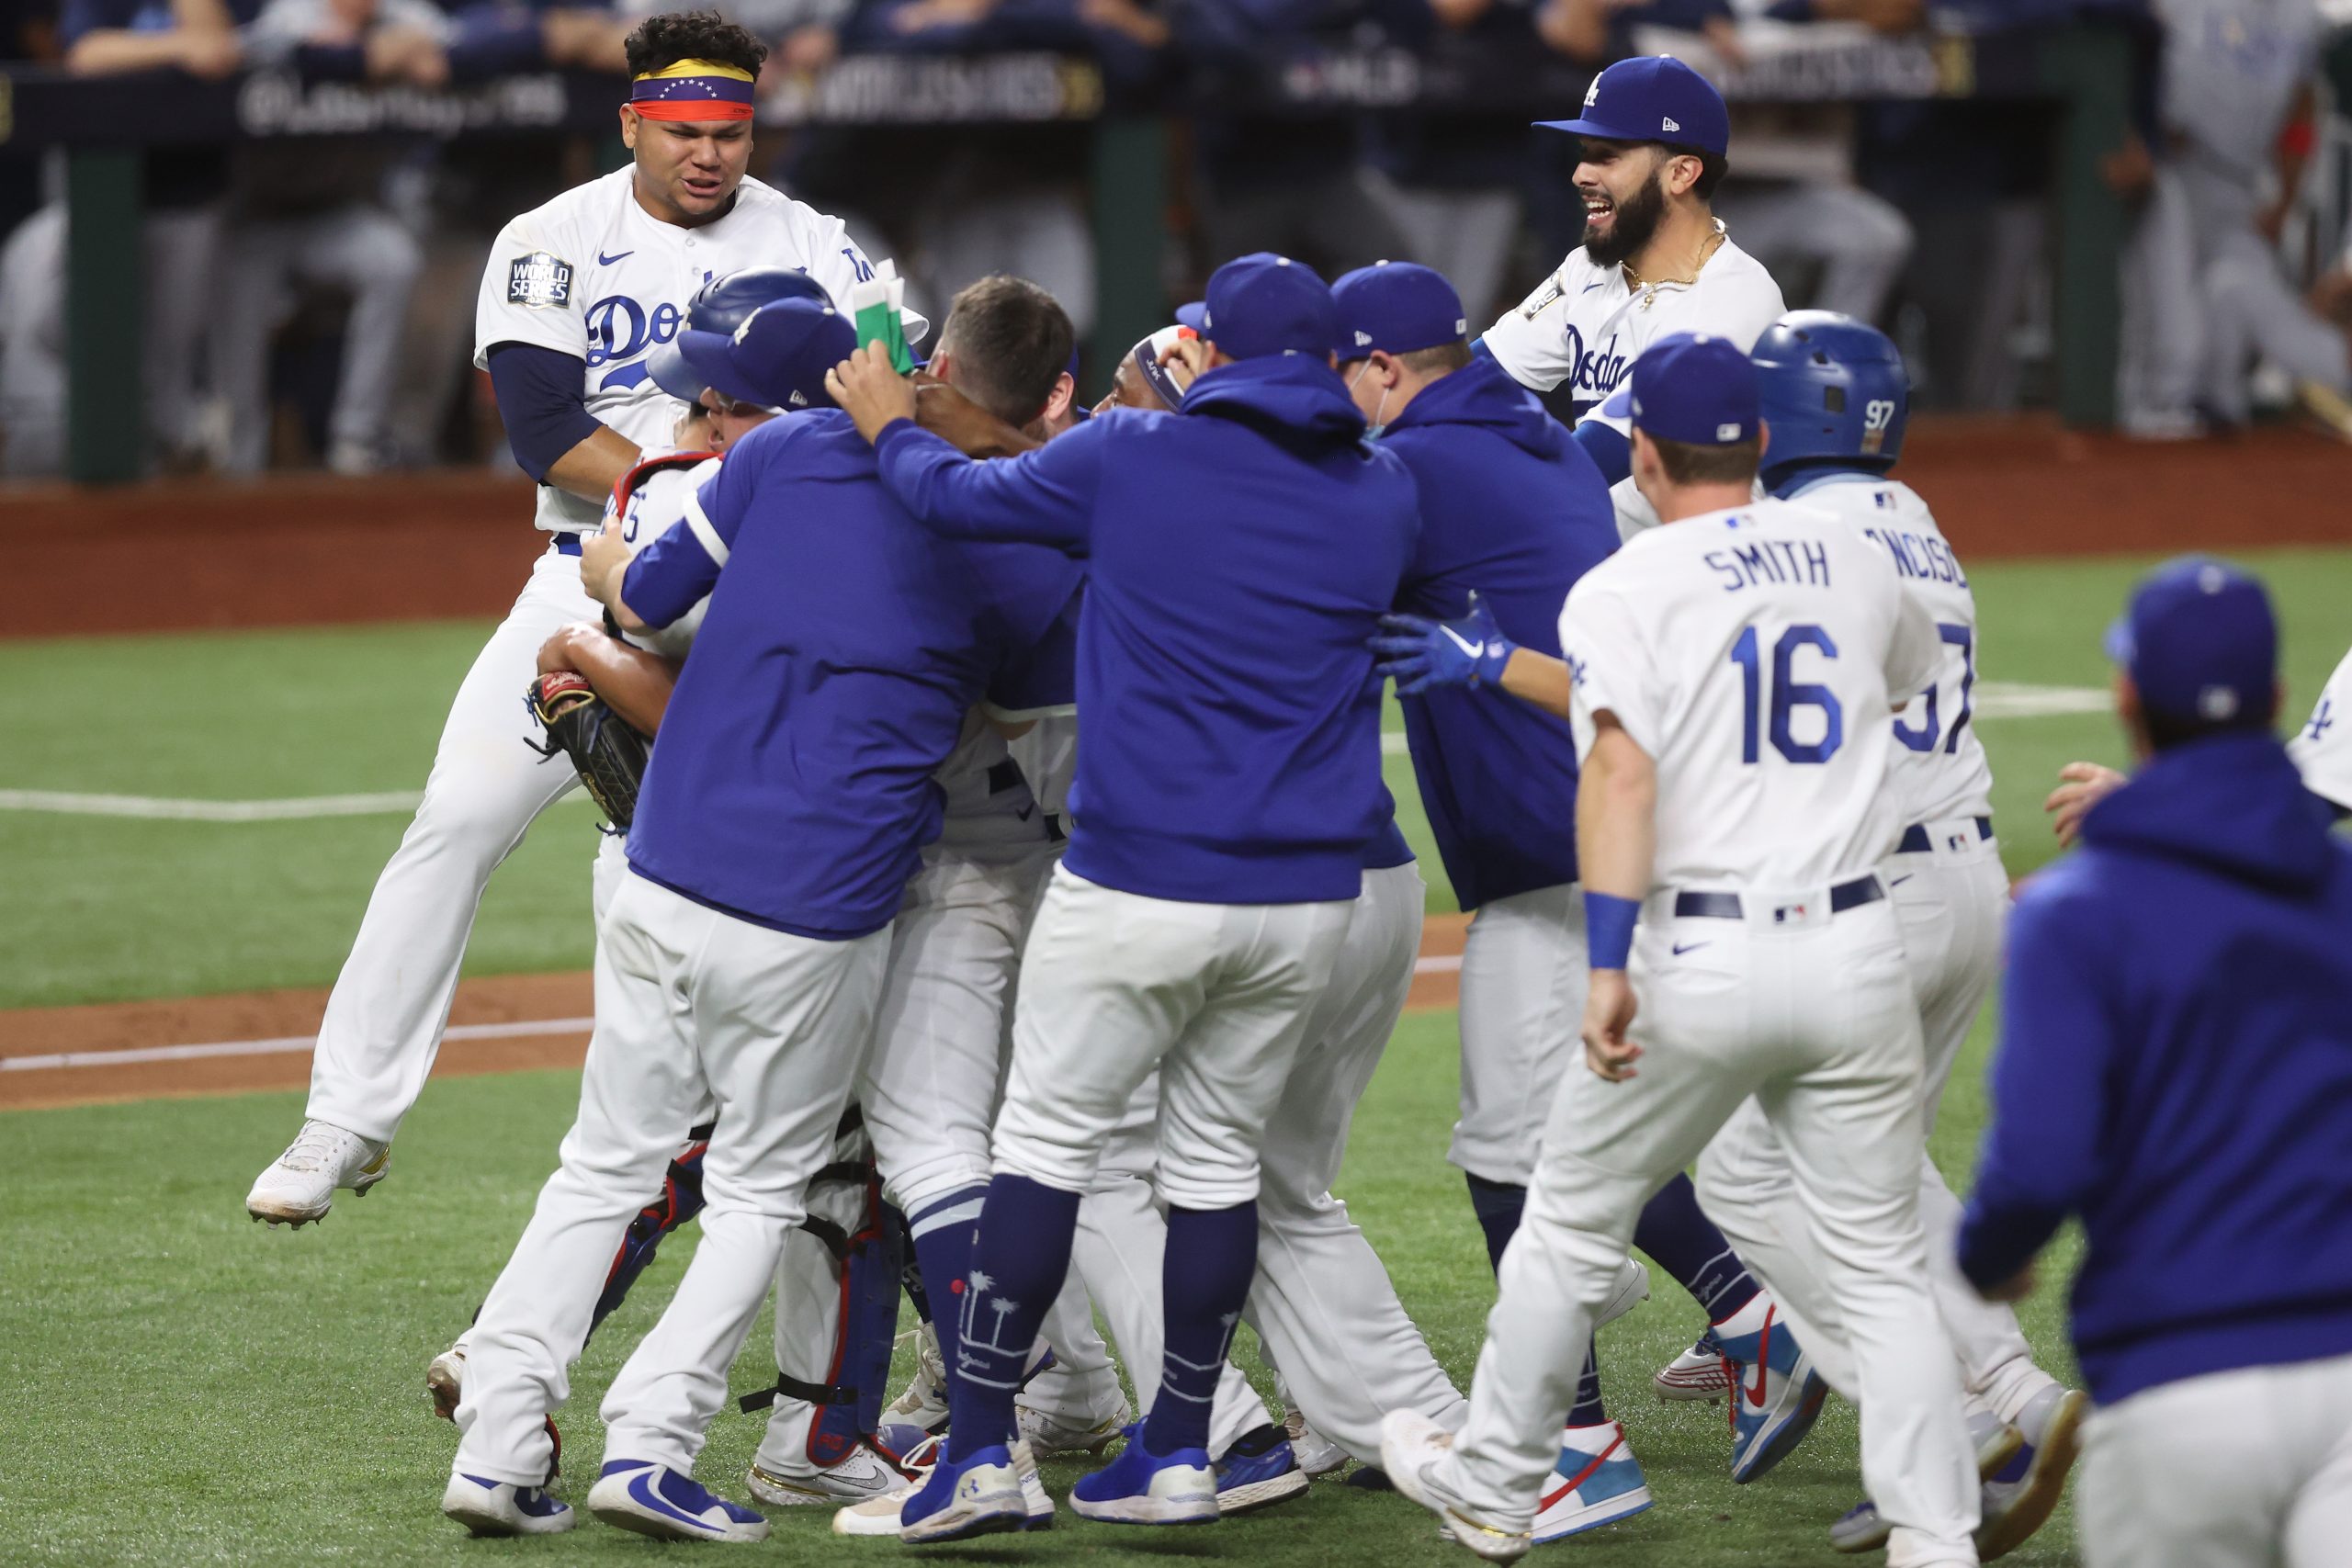 Photos: Dodgers win the World Series over the Rays